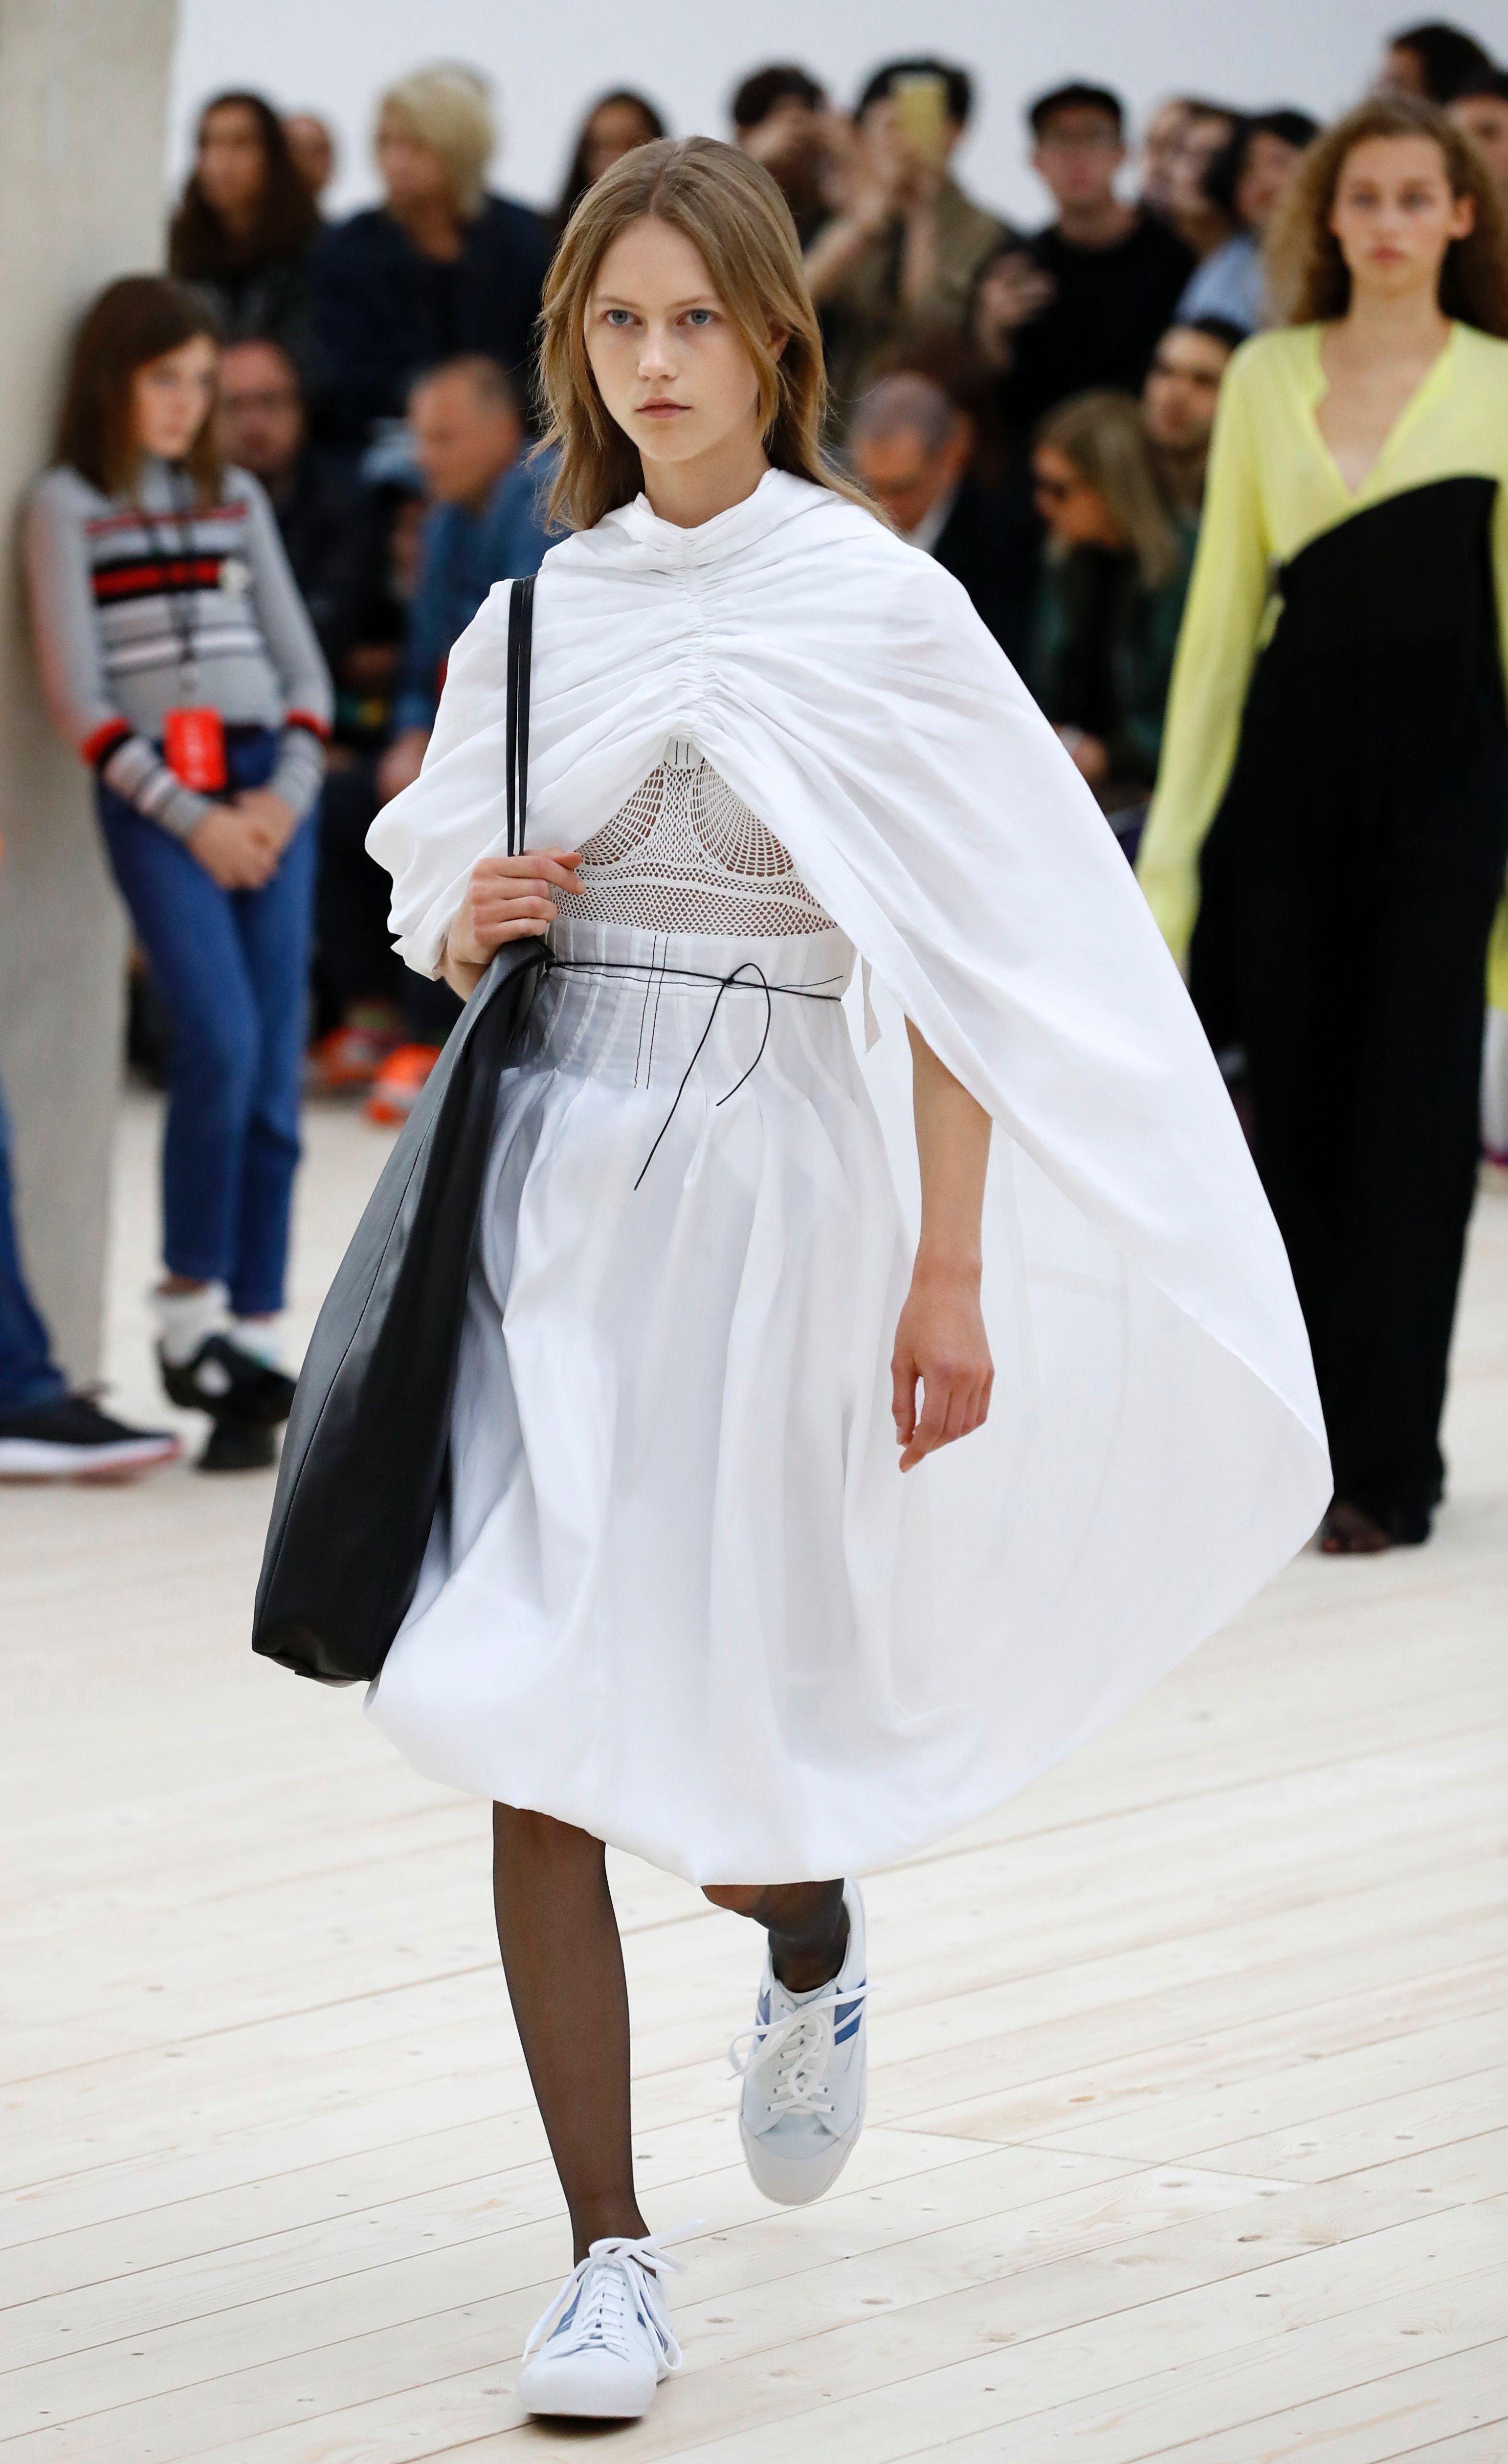 FASHION BY THE RULES: Céline by Phoebe Philo .. Paris ..spring 2015